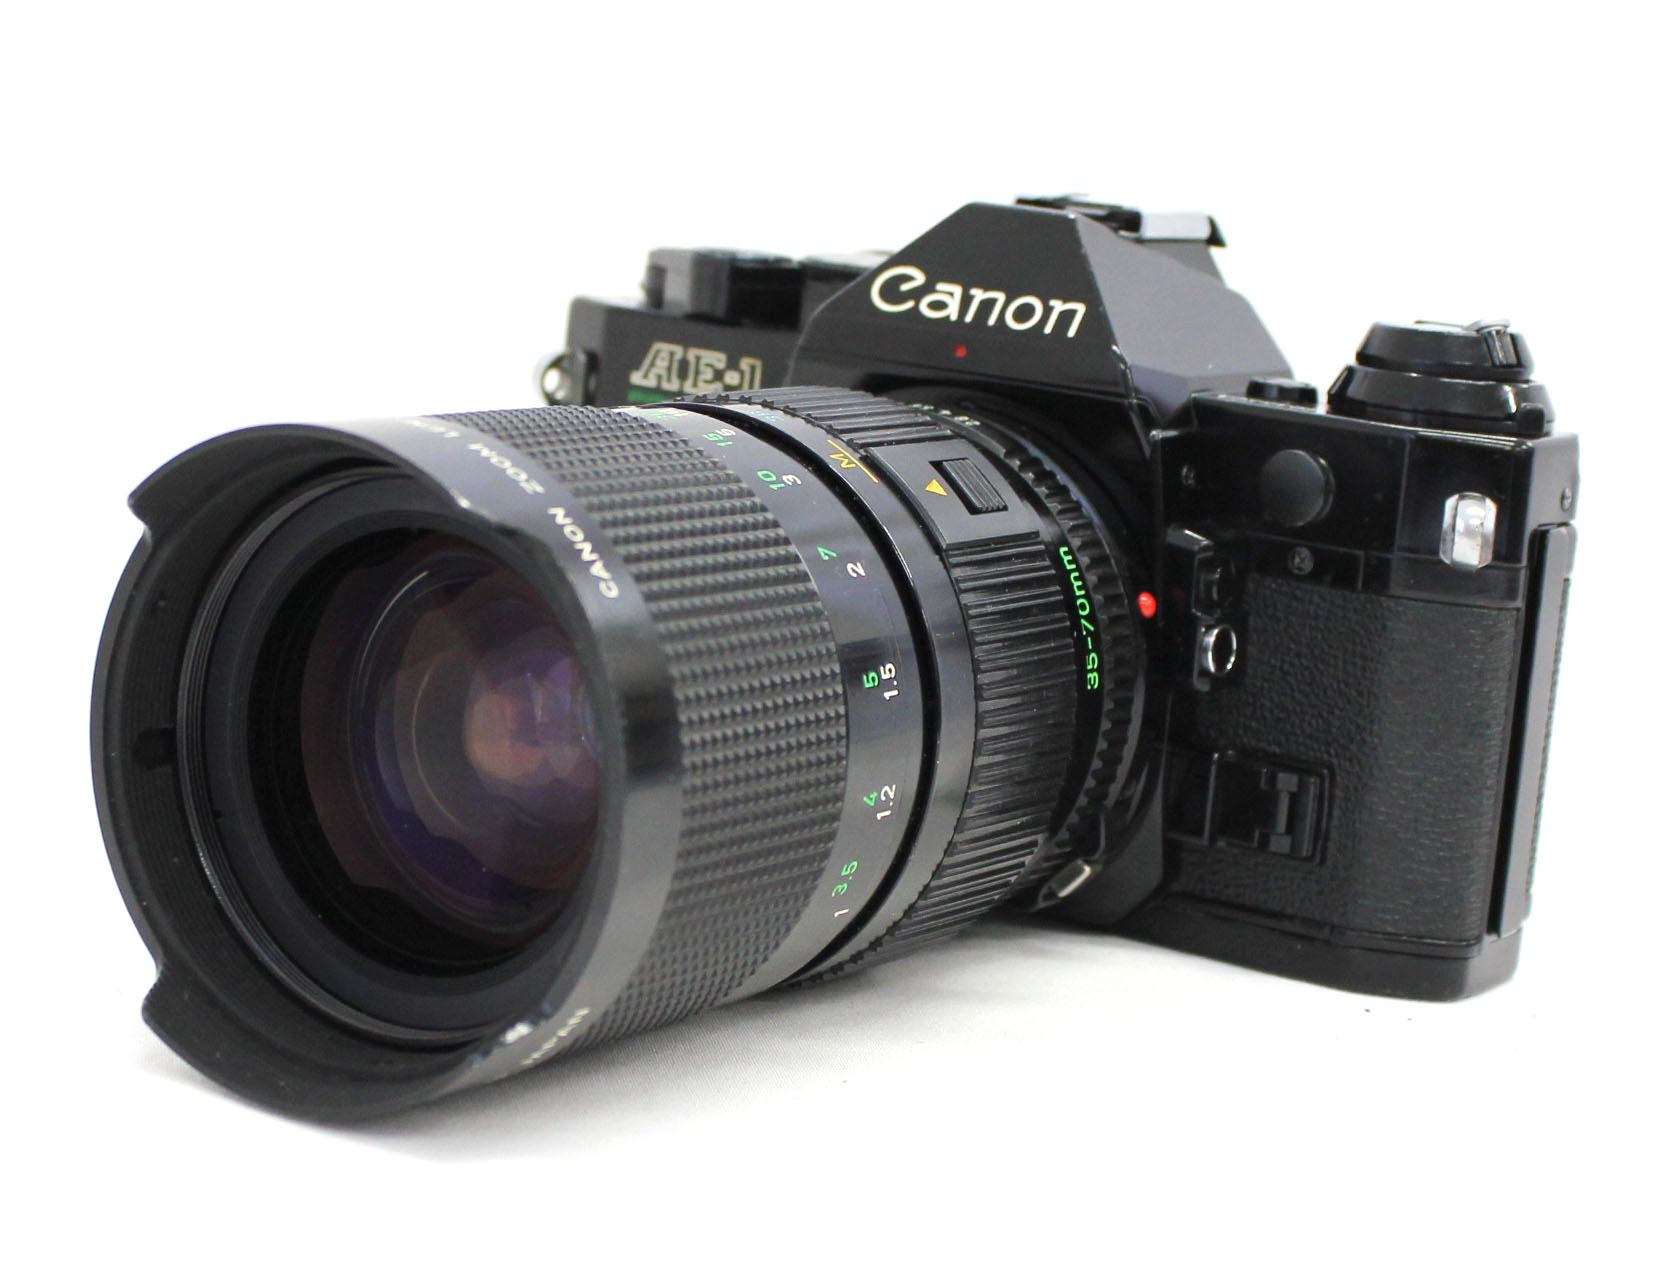 Japan Used Camera Shop | Canon AE-1 Program SLR Camera with New FD 35-70mm F/2.8-3.5 Zoom Lens from Japan